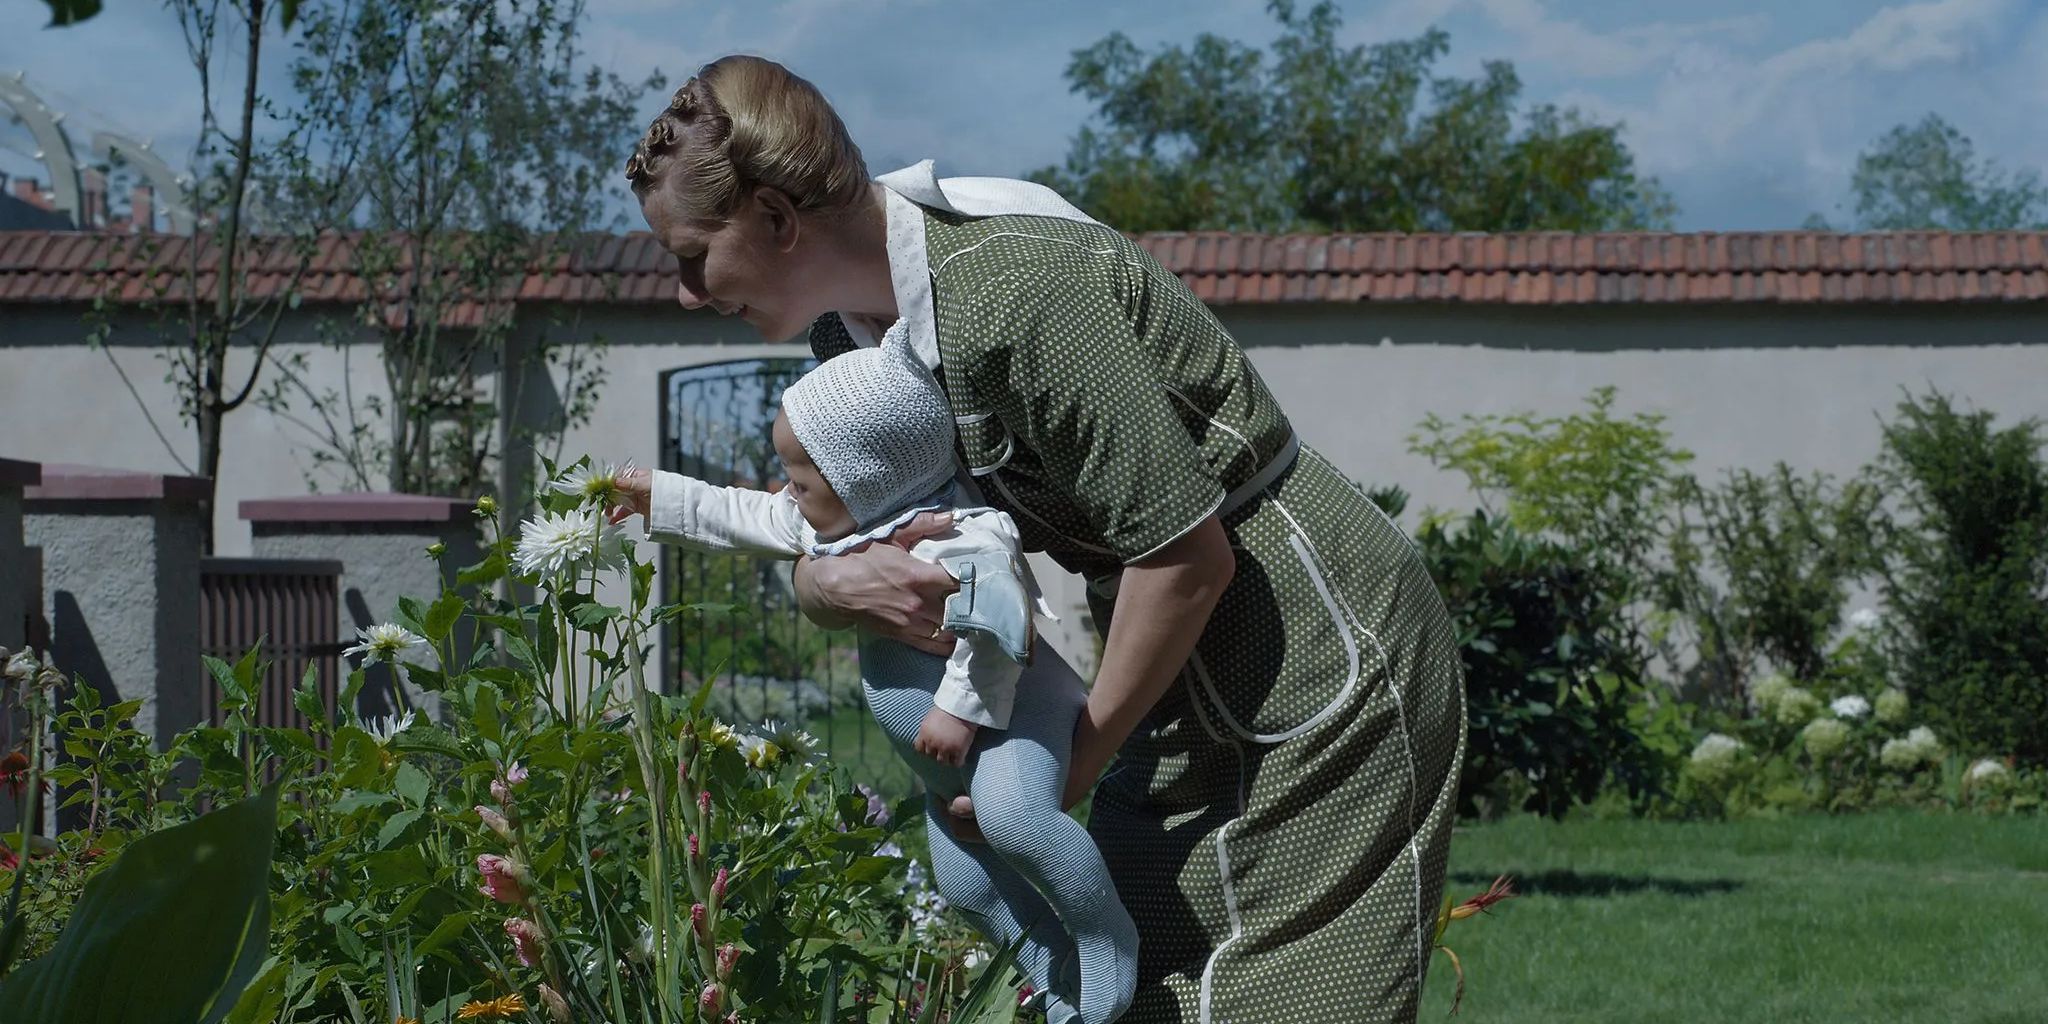 In ‘The Zone of Interest’, Höss’s wife played by Sandra Hüller picks flowers in her garden with her baby.